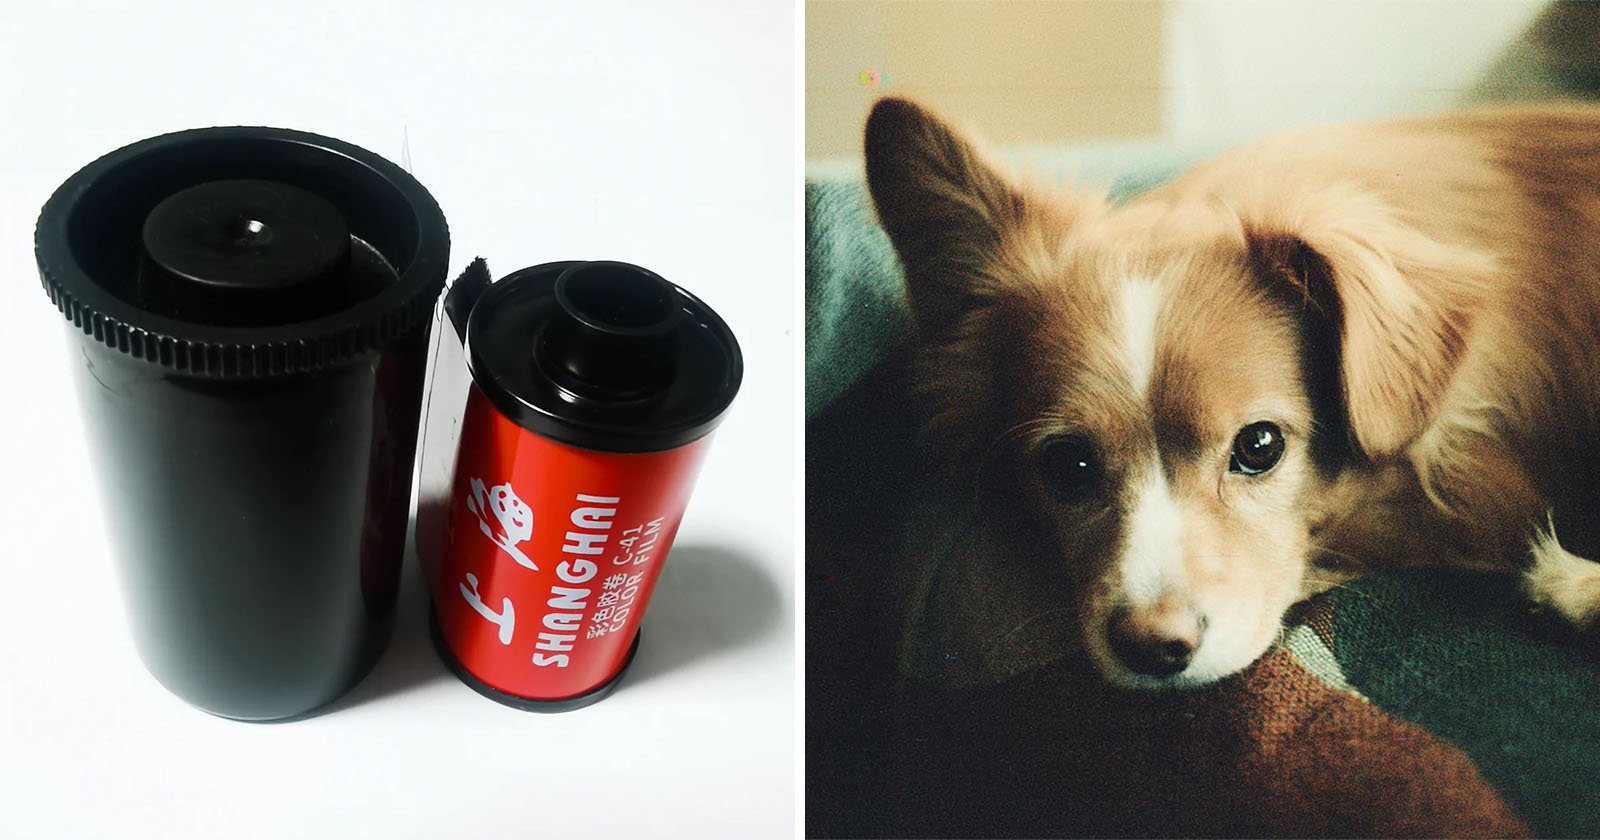 Left: a film canister next to a small red soda can with cyrillic script. right: a light brown and white dog resting its head on a green surface, looking directly at the camera.